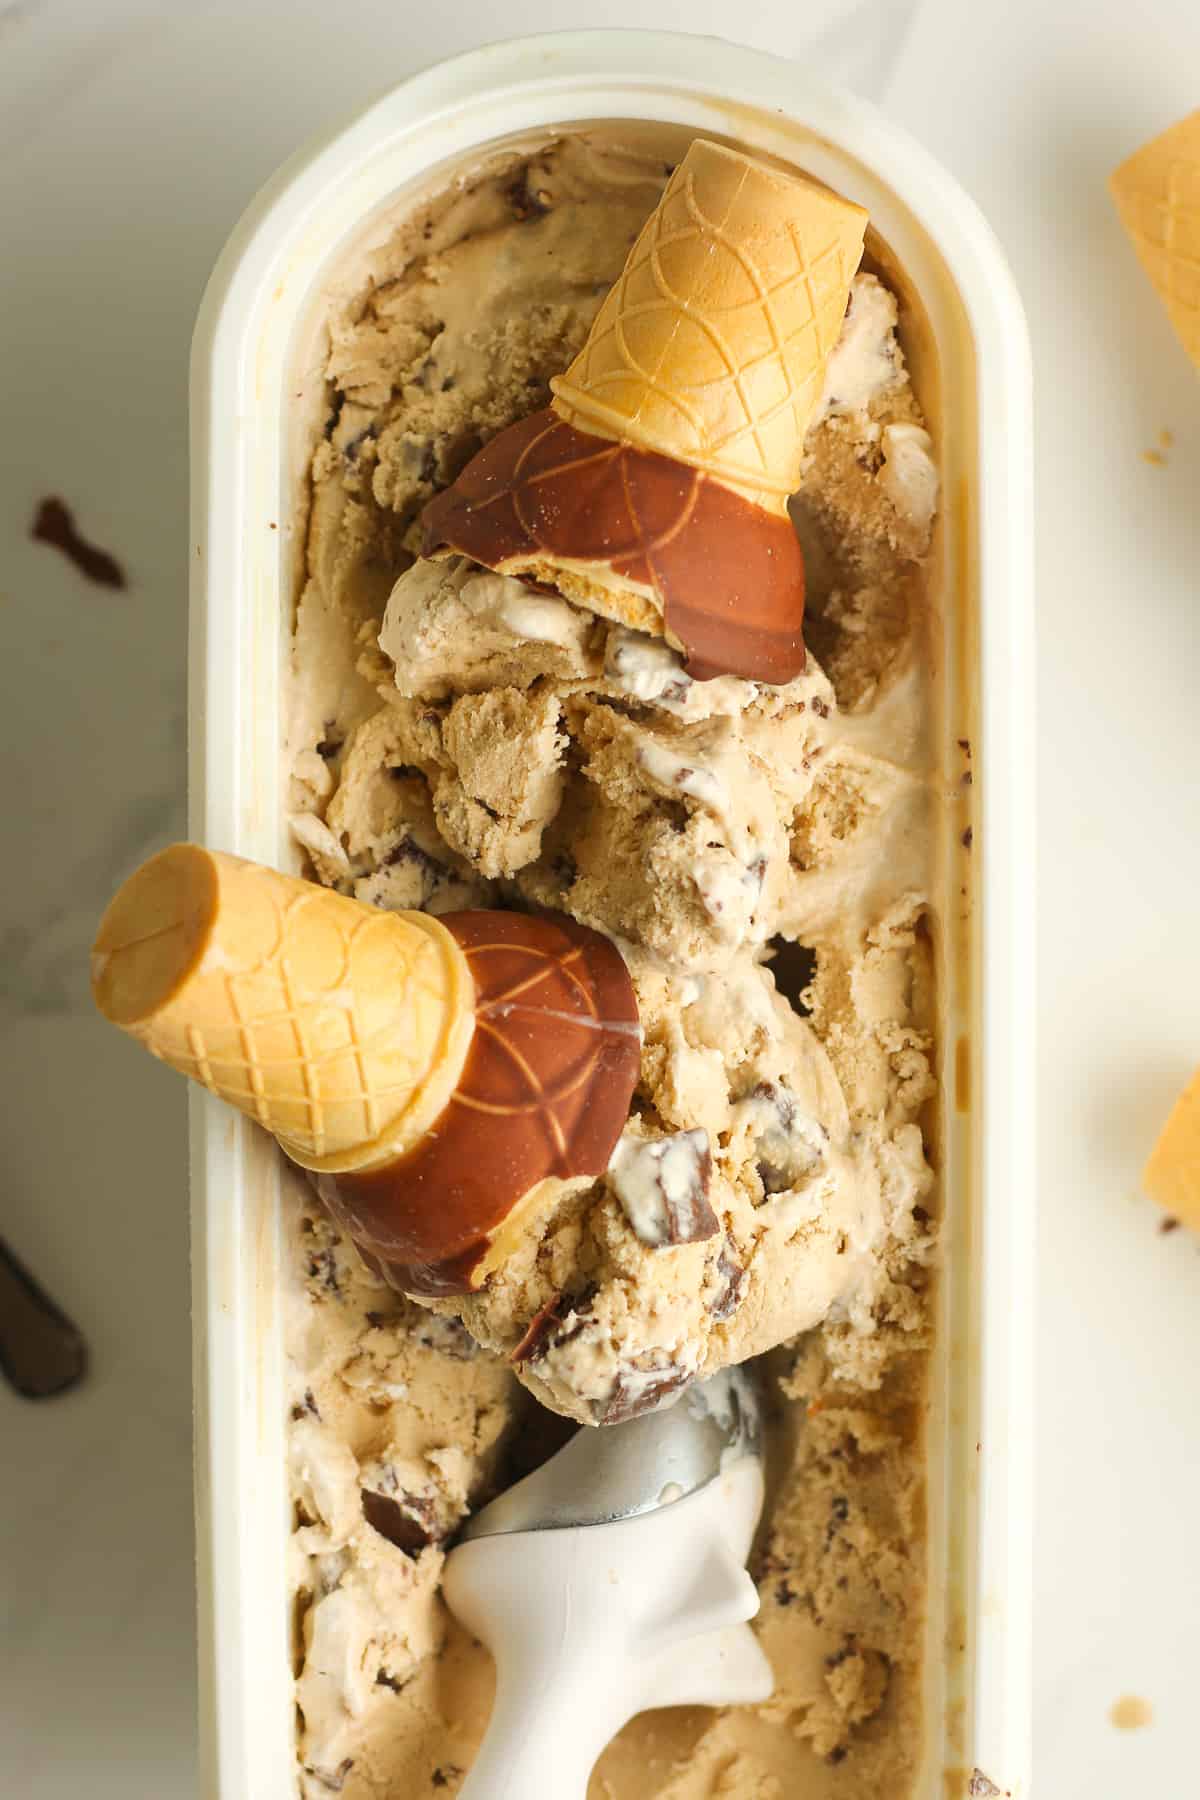 A container of ice cream, with cones dipped in it.